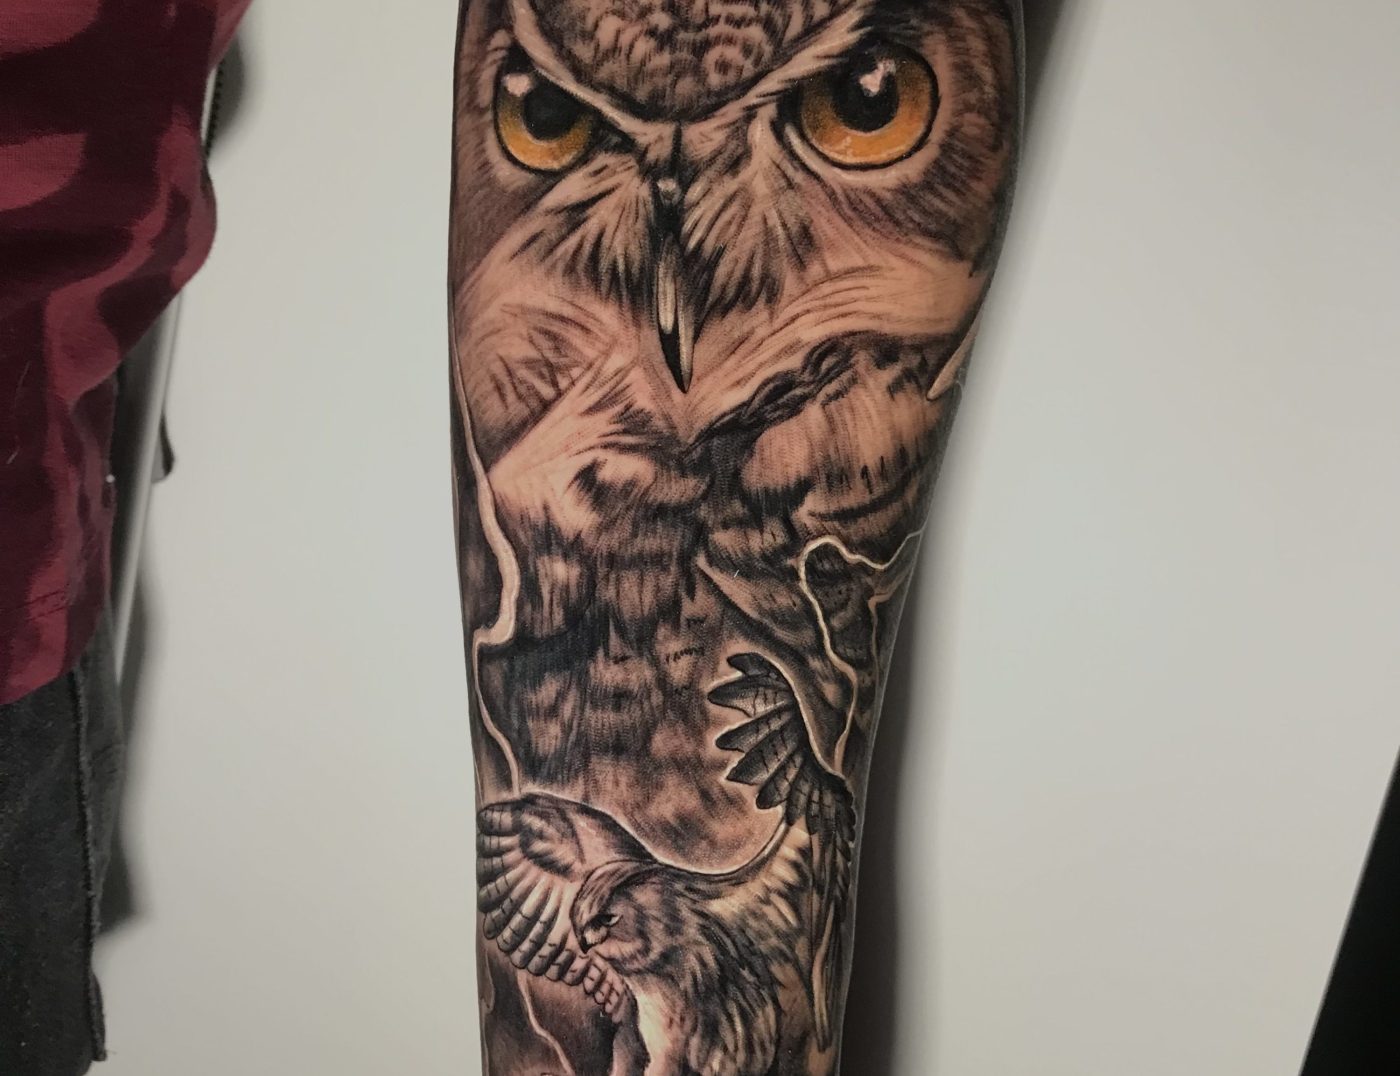 Owl With Yellow Eyes Black and Gray Photo Realism Tattoo By Rene Cristobal